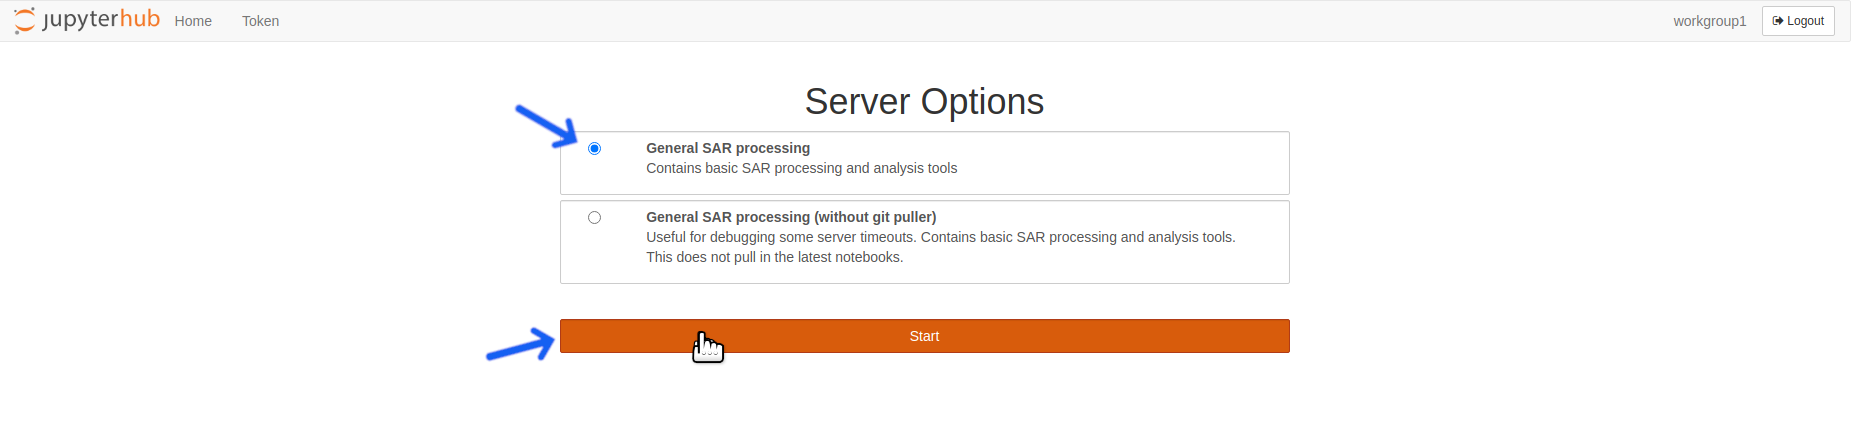 The "General SAR processing" server option is the first option on the server option screen.